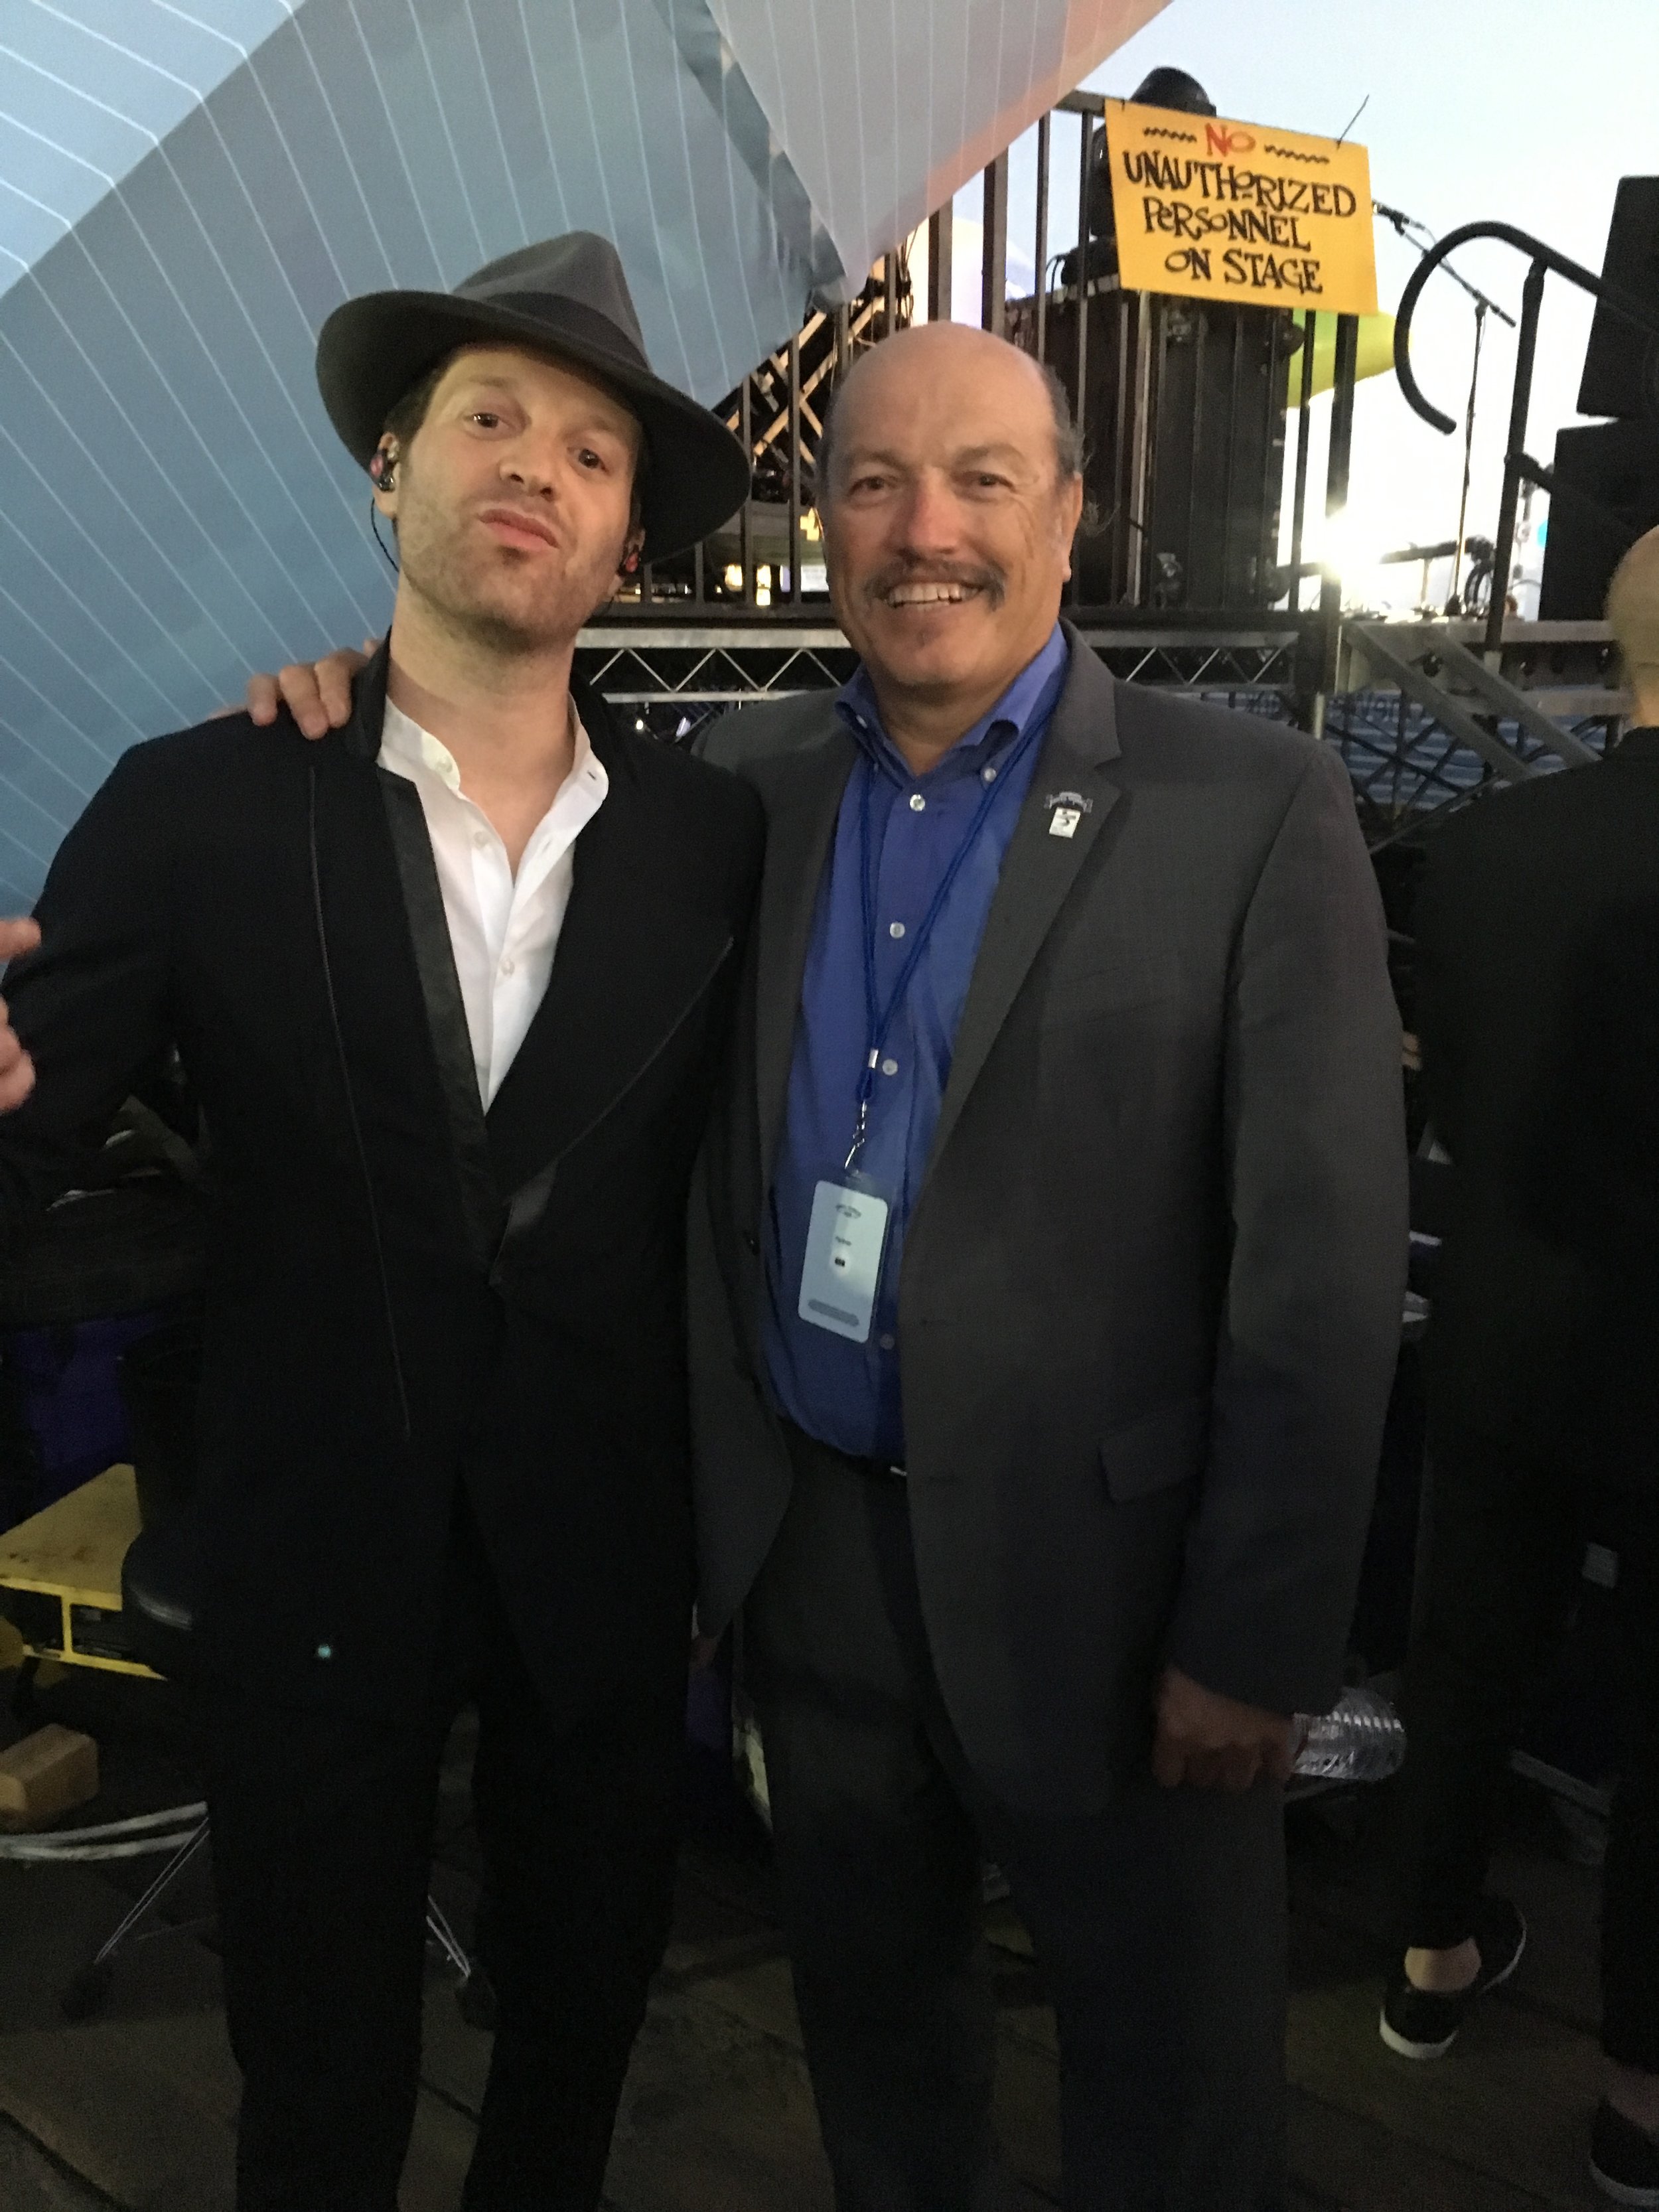 Mayor Tony Vazquez with Mayer Hawthorne at the opening night of the Twilight Concert series in Santa Monica, CA